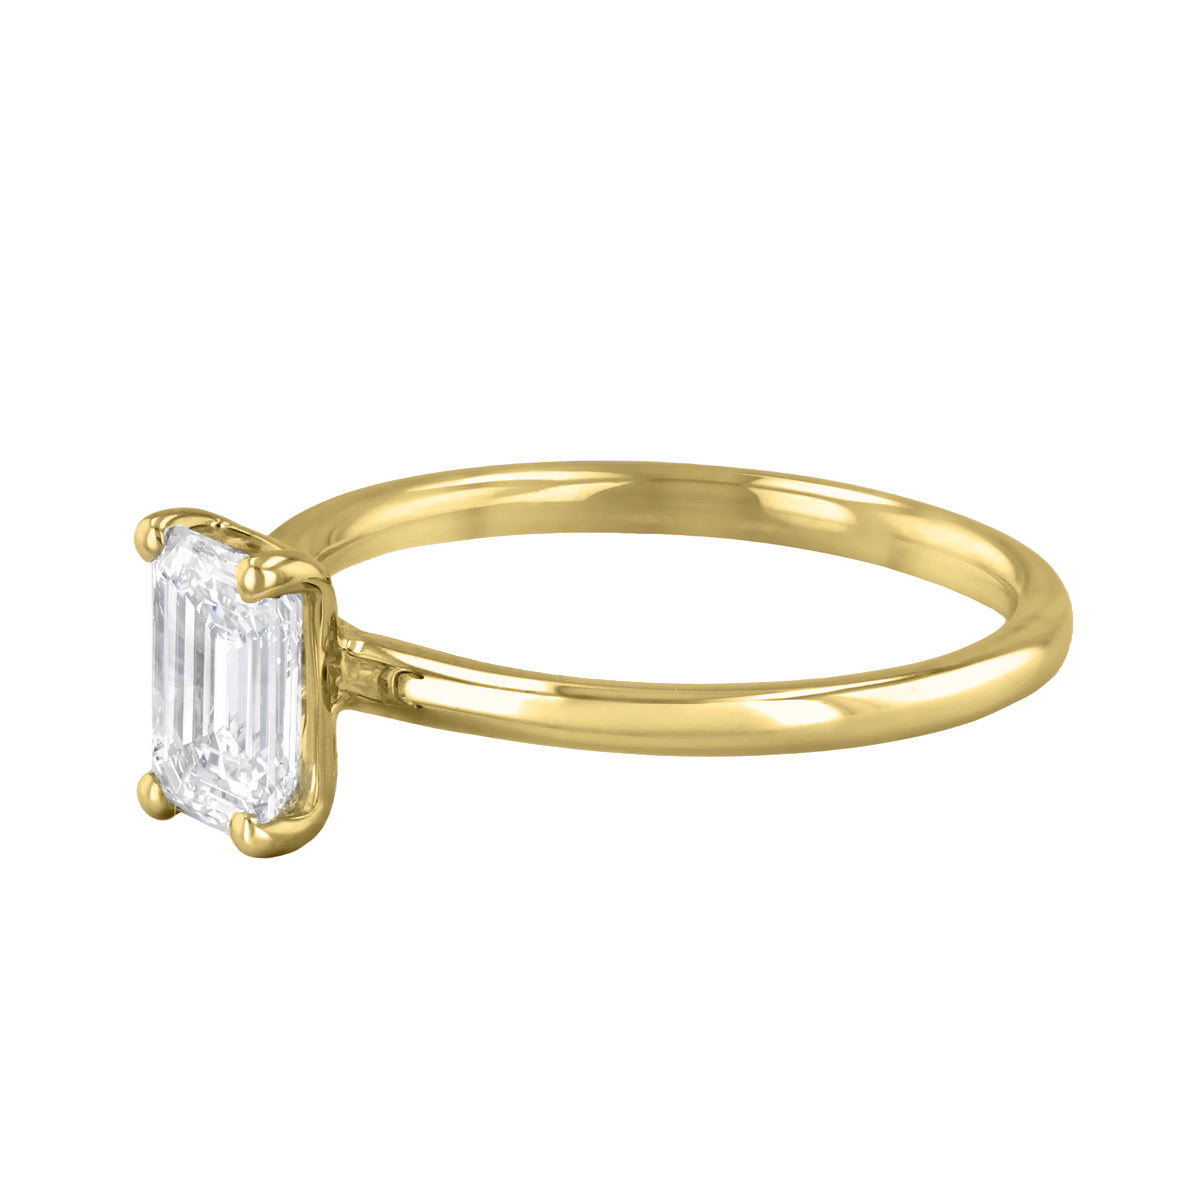 1-20ct-sofia-emerald-cut-solitaire-diamond-engagement-ring-18ct-yellow-gold